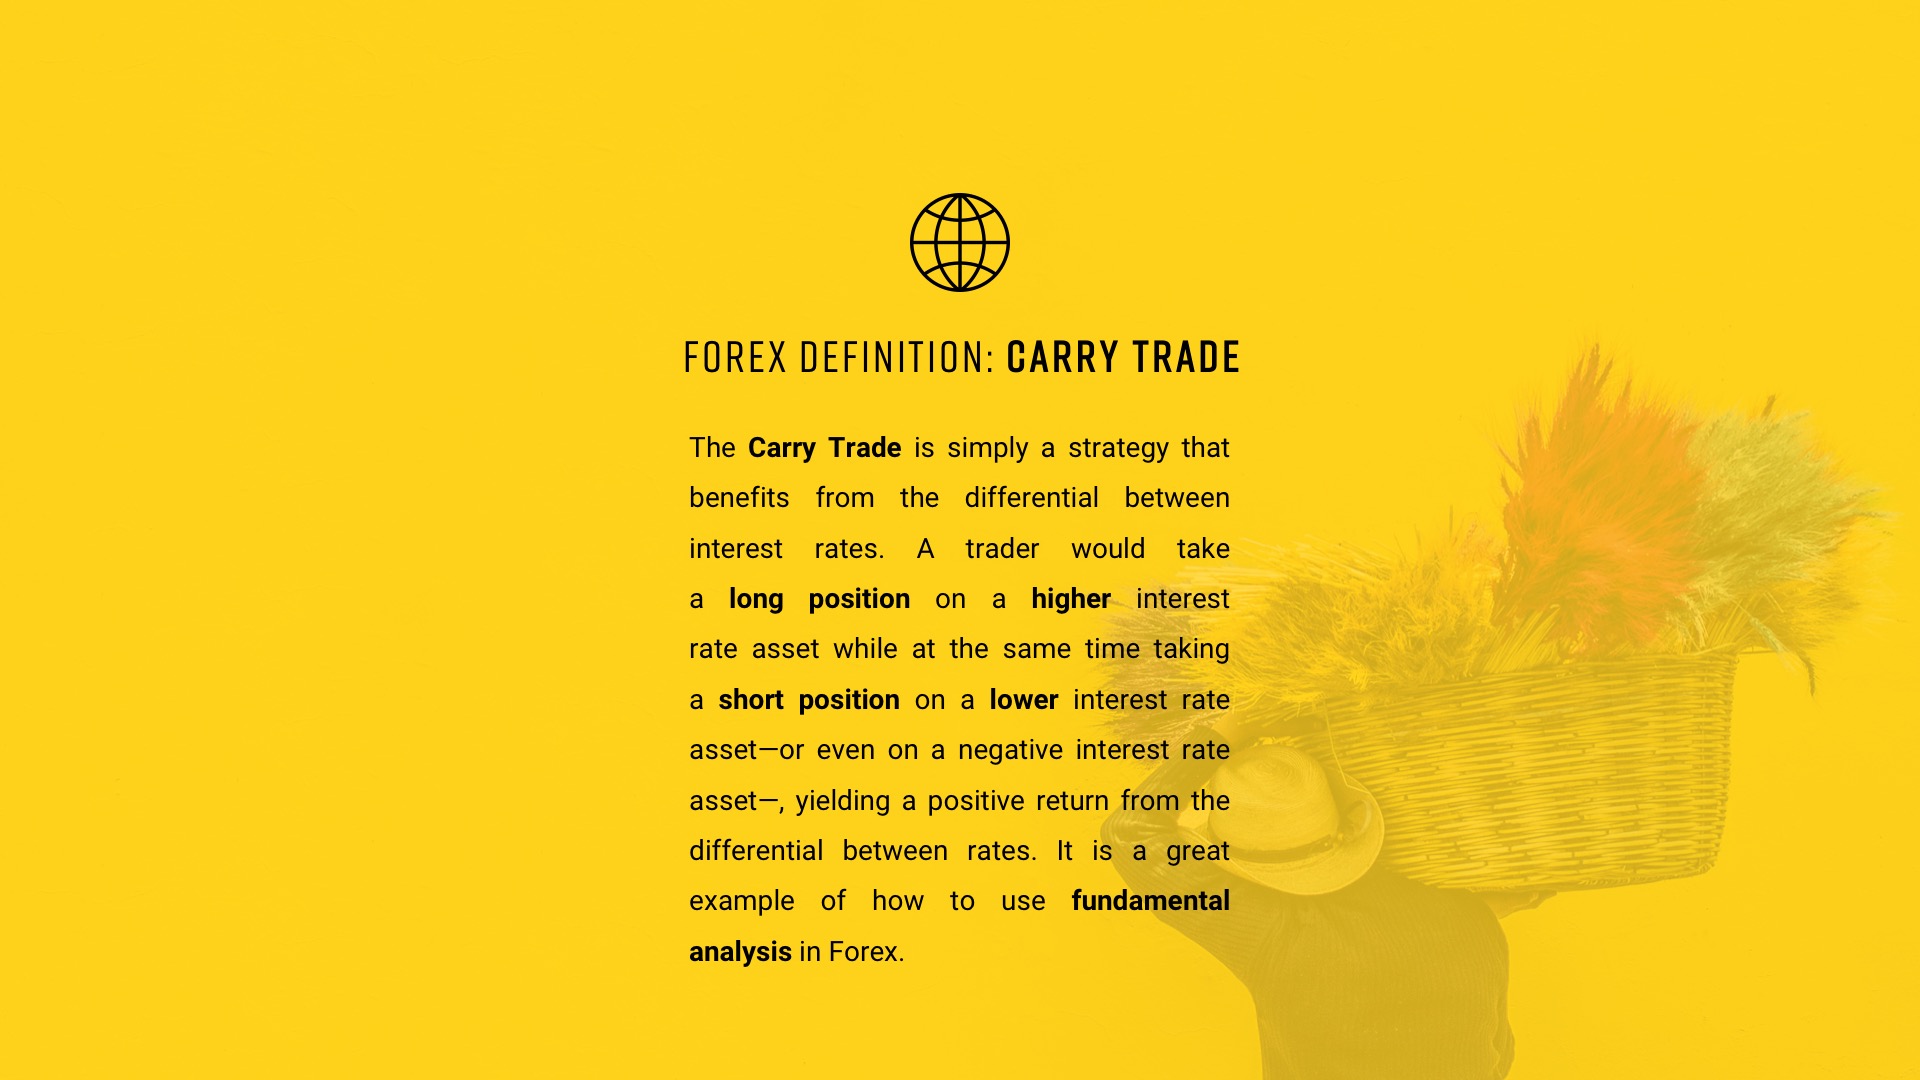 Forex definition: Carry Trade (Actual screenshot from the Forex 101 training course for PRO Members)